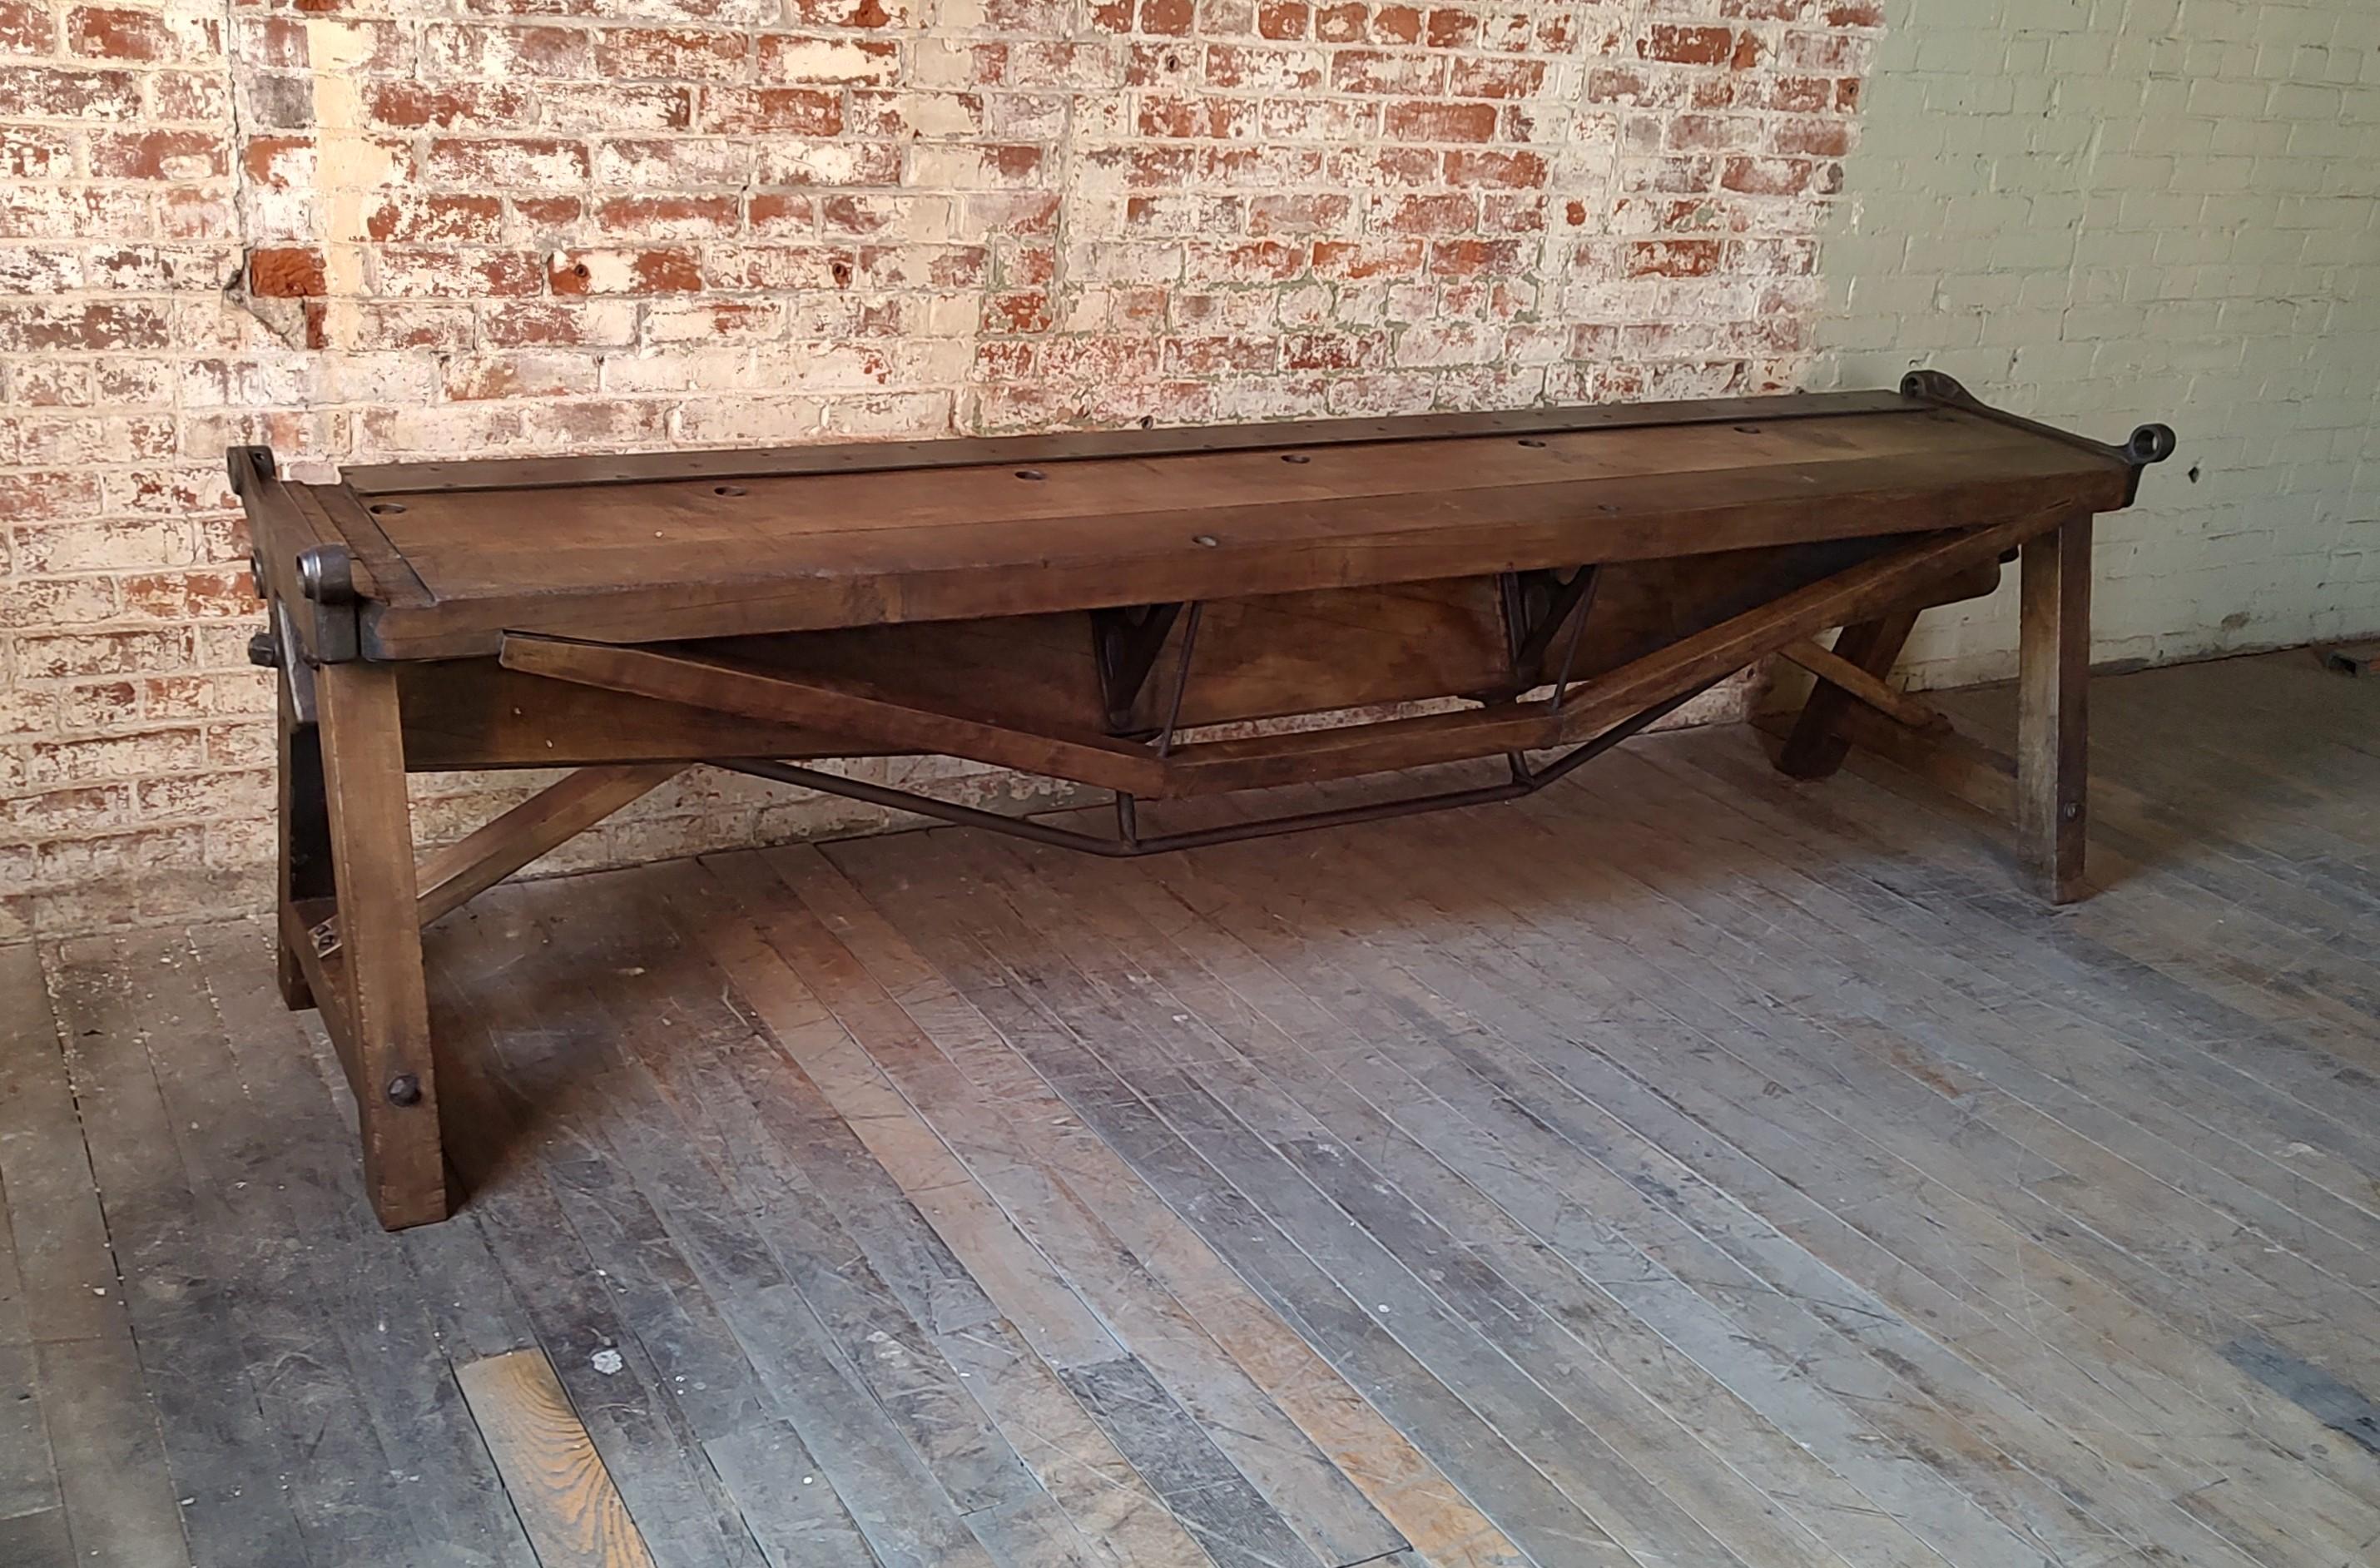 Antique Brake Table

Overall Dimensions: 24 3/4